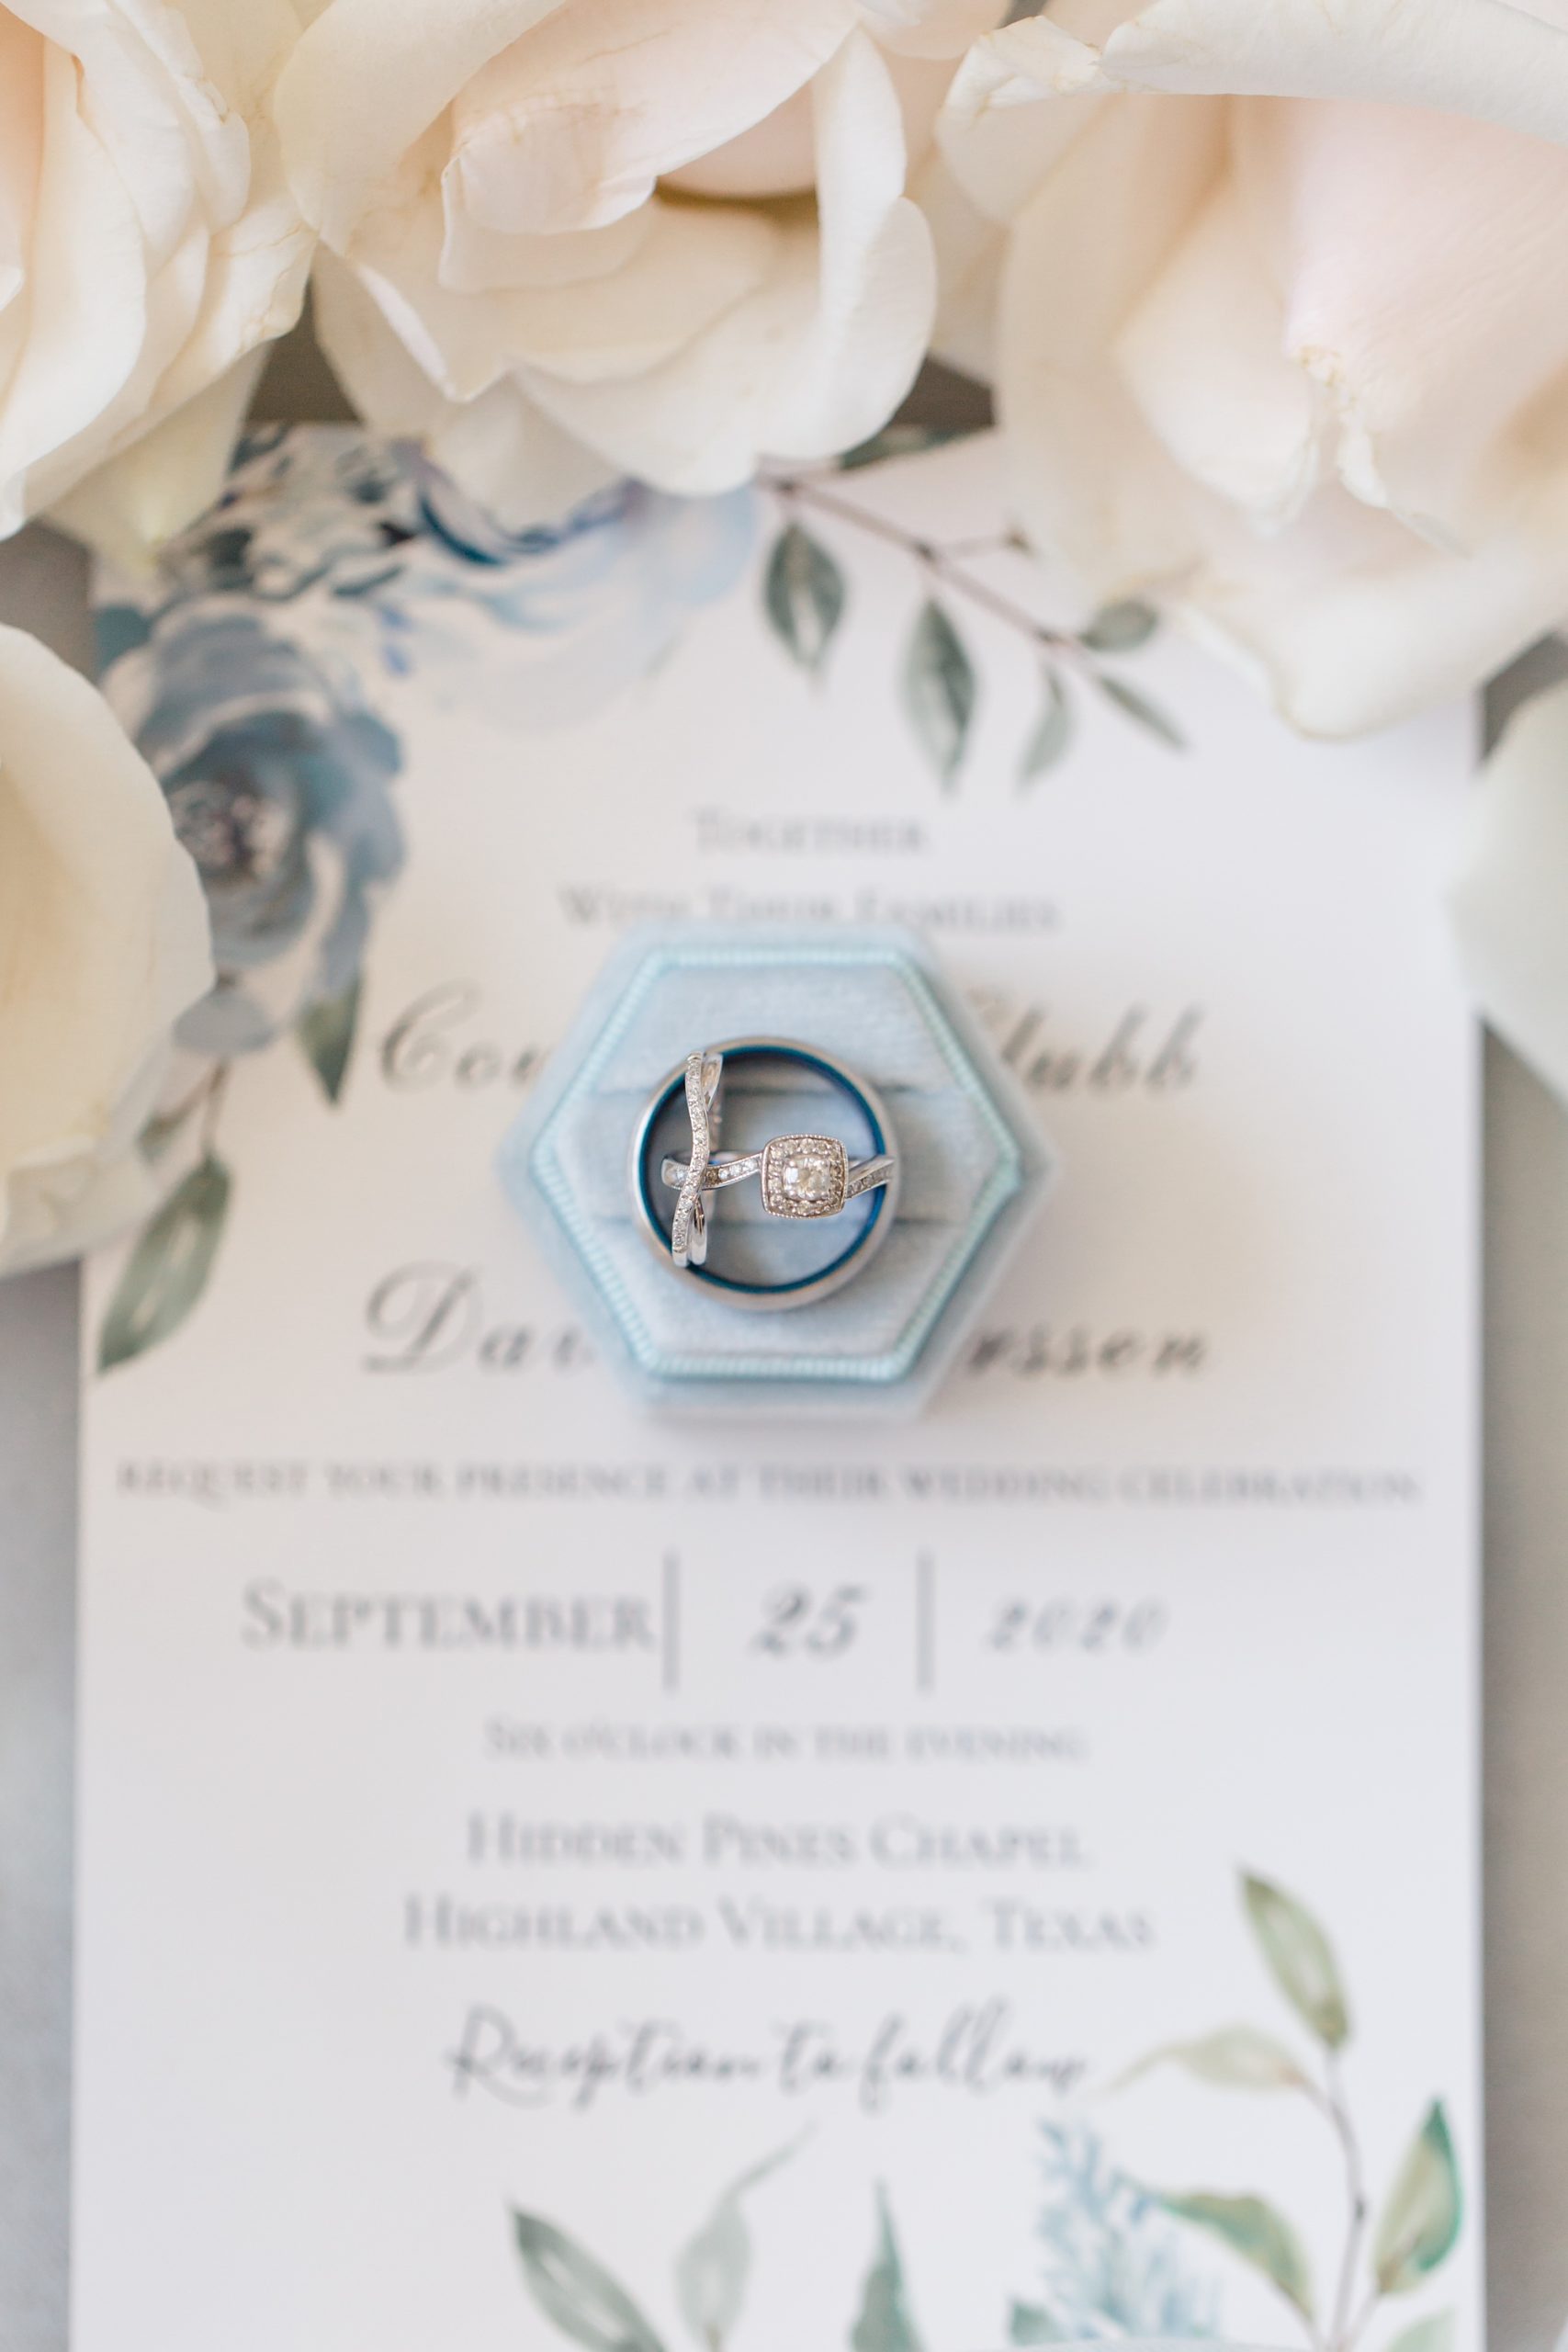 bride's ring sits in blue box